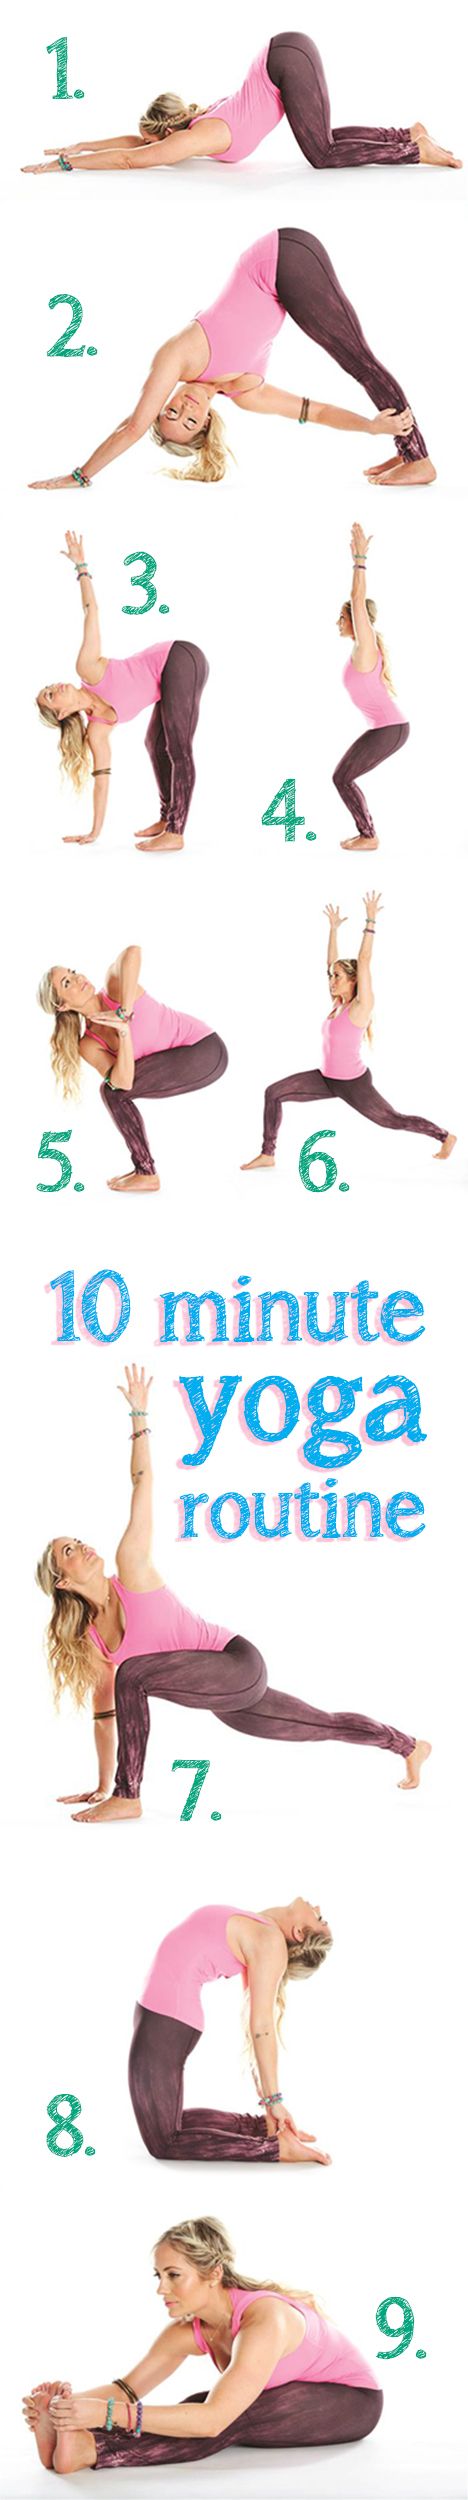 19 Yoga Routines That Will Stretch Your Whole Body & Make You Feel ...